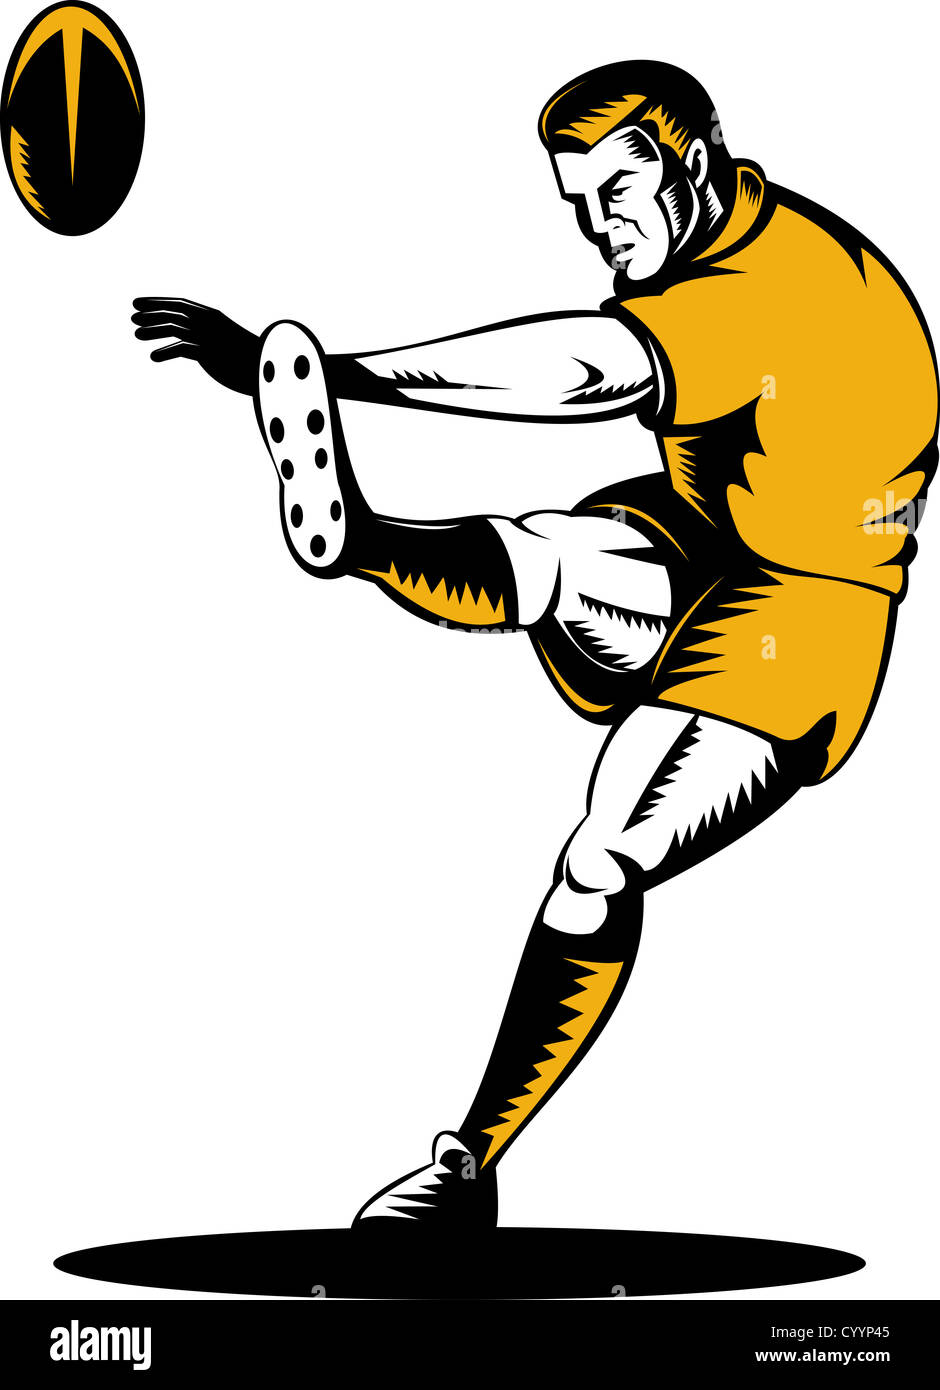 illustration of a rugby player kicking the ball on isolated background done in retro woodcut style Stock Photo